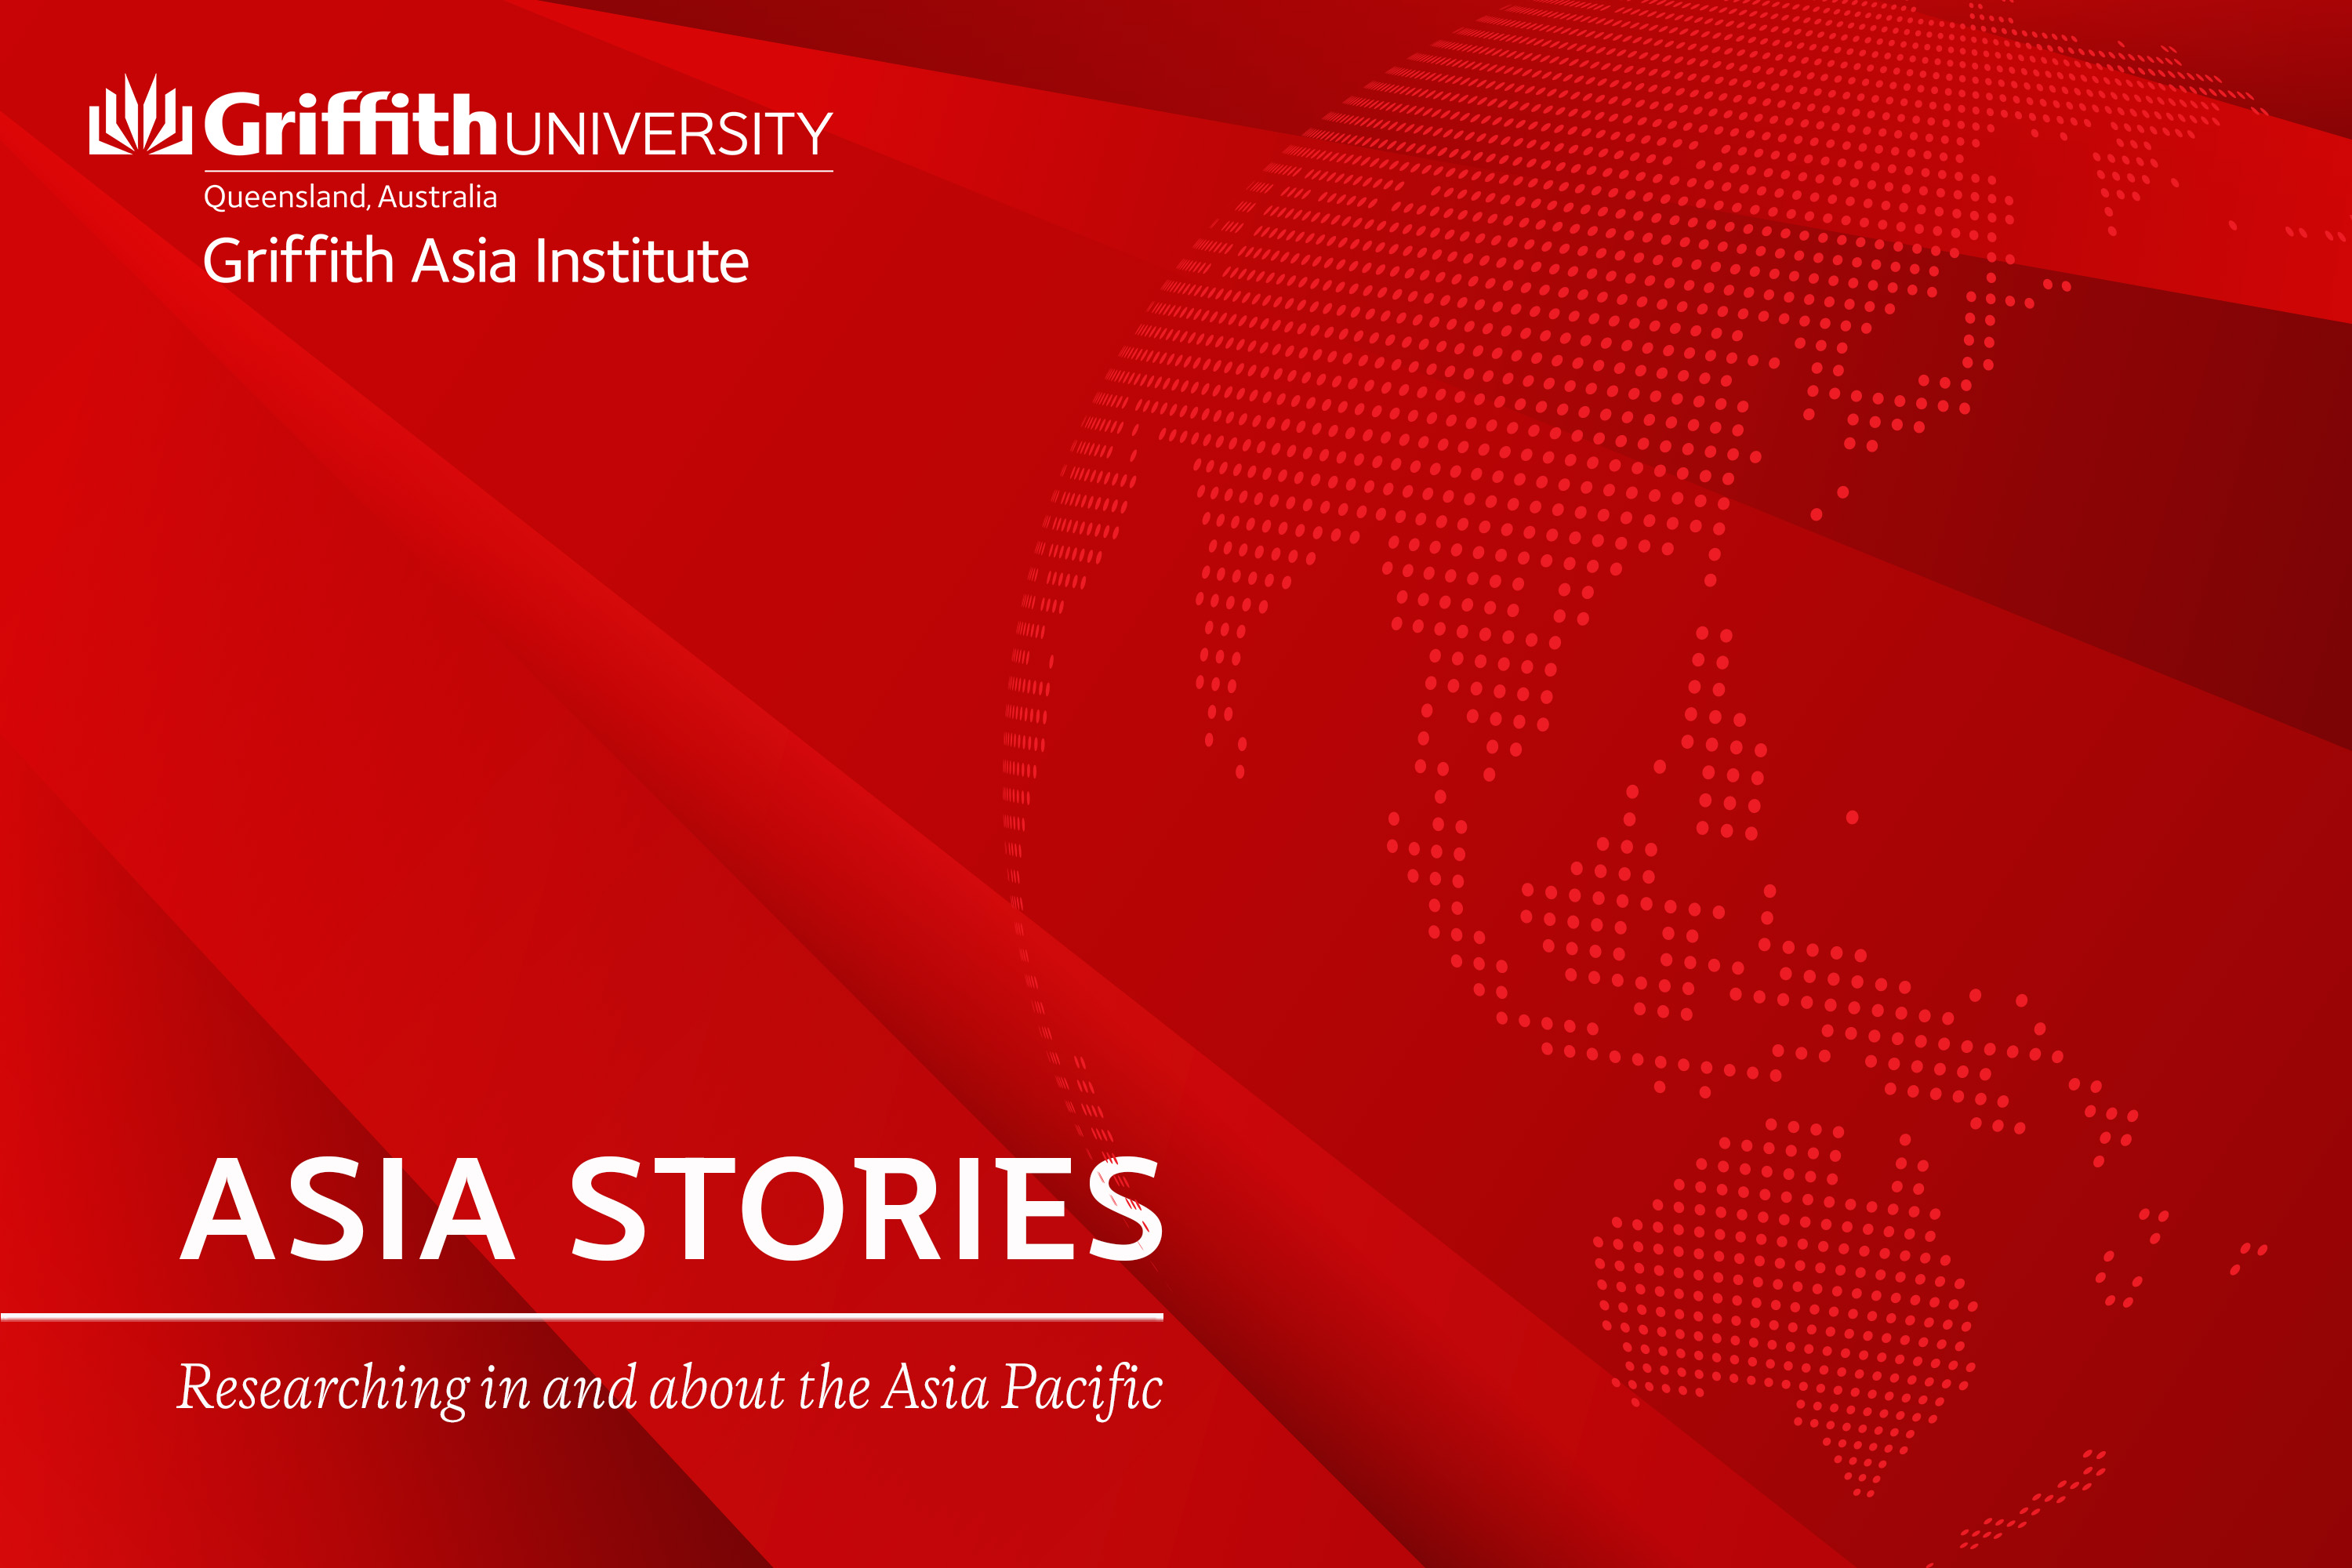 Asia Stories | Taking the long road - a research journey towards the Asia Pacific